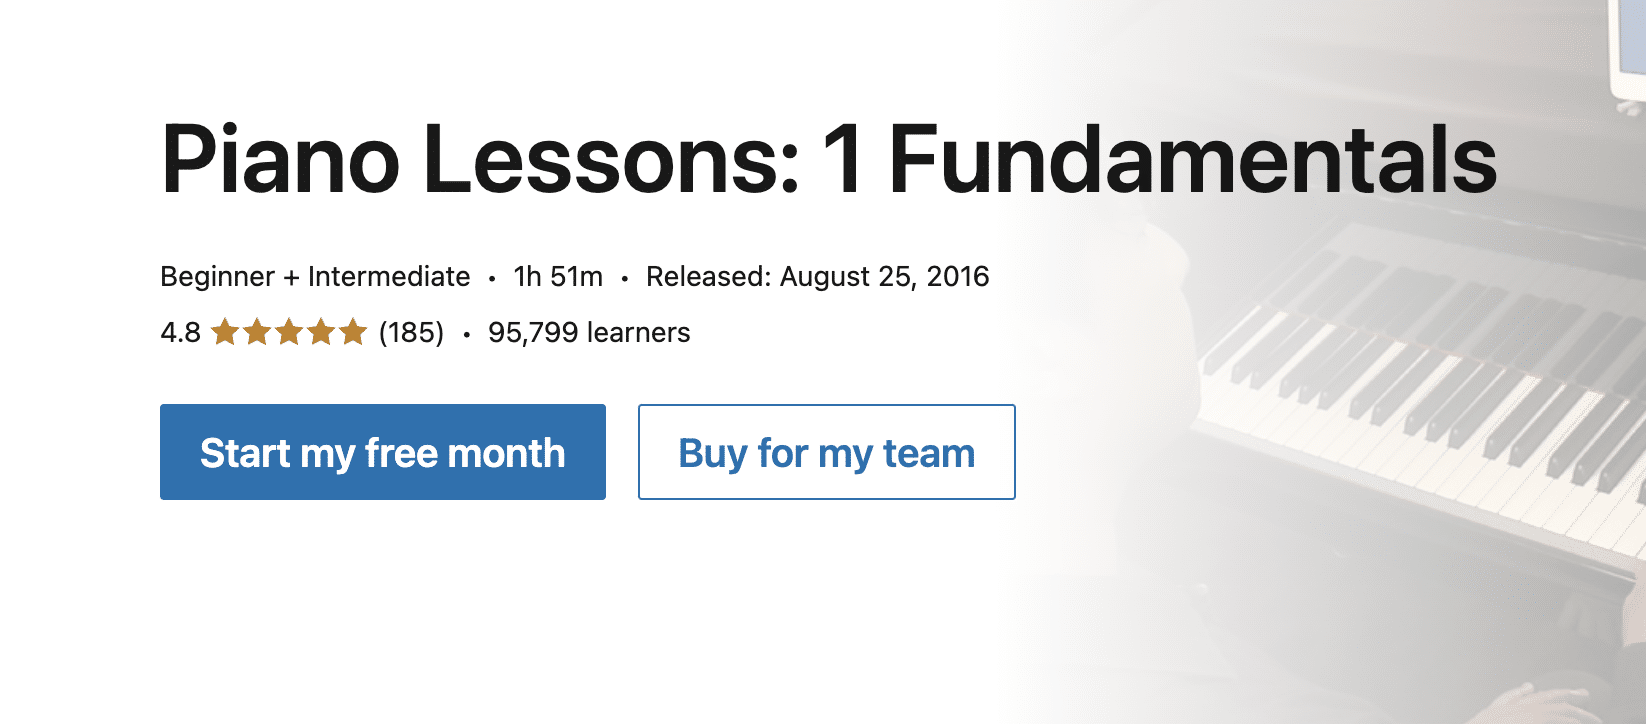 Piano Lessons Fundamentals by LinkedIn Learning 